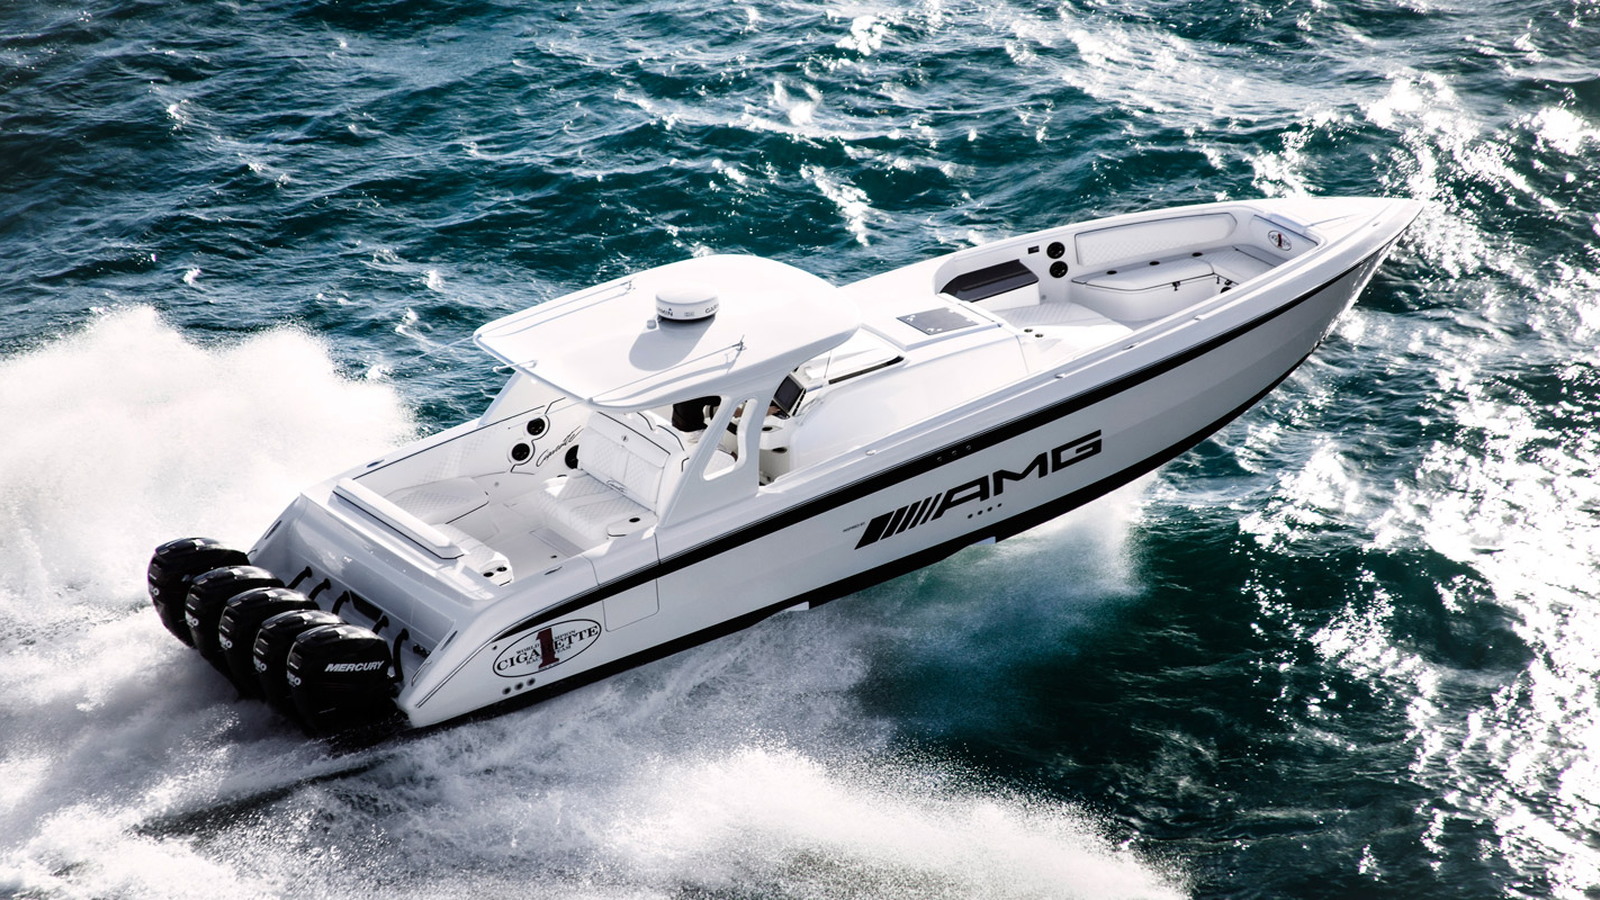 Cigarette Racing Huntress is a 42-foot boat whose design is inspired by the Mercedes-Benz G63 AMG